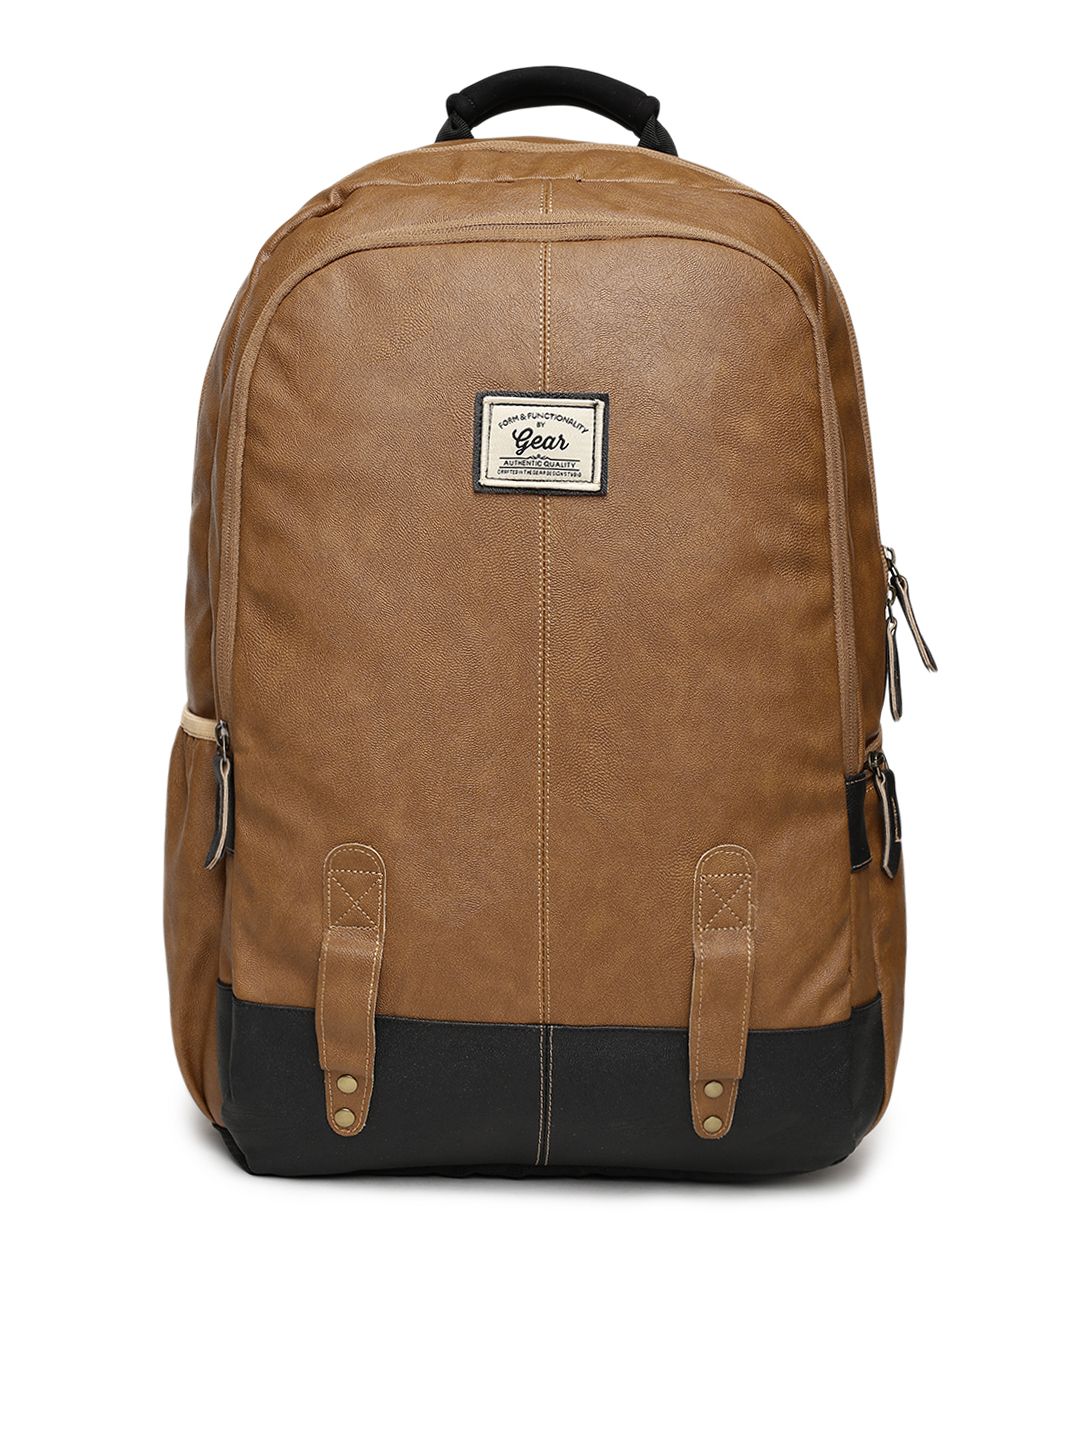 Gear Unisex Tan Solid Laptop Backpack Price in India